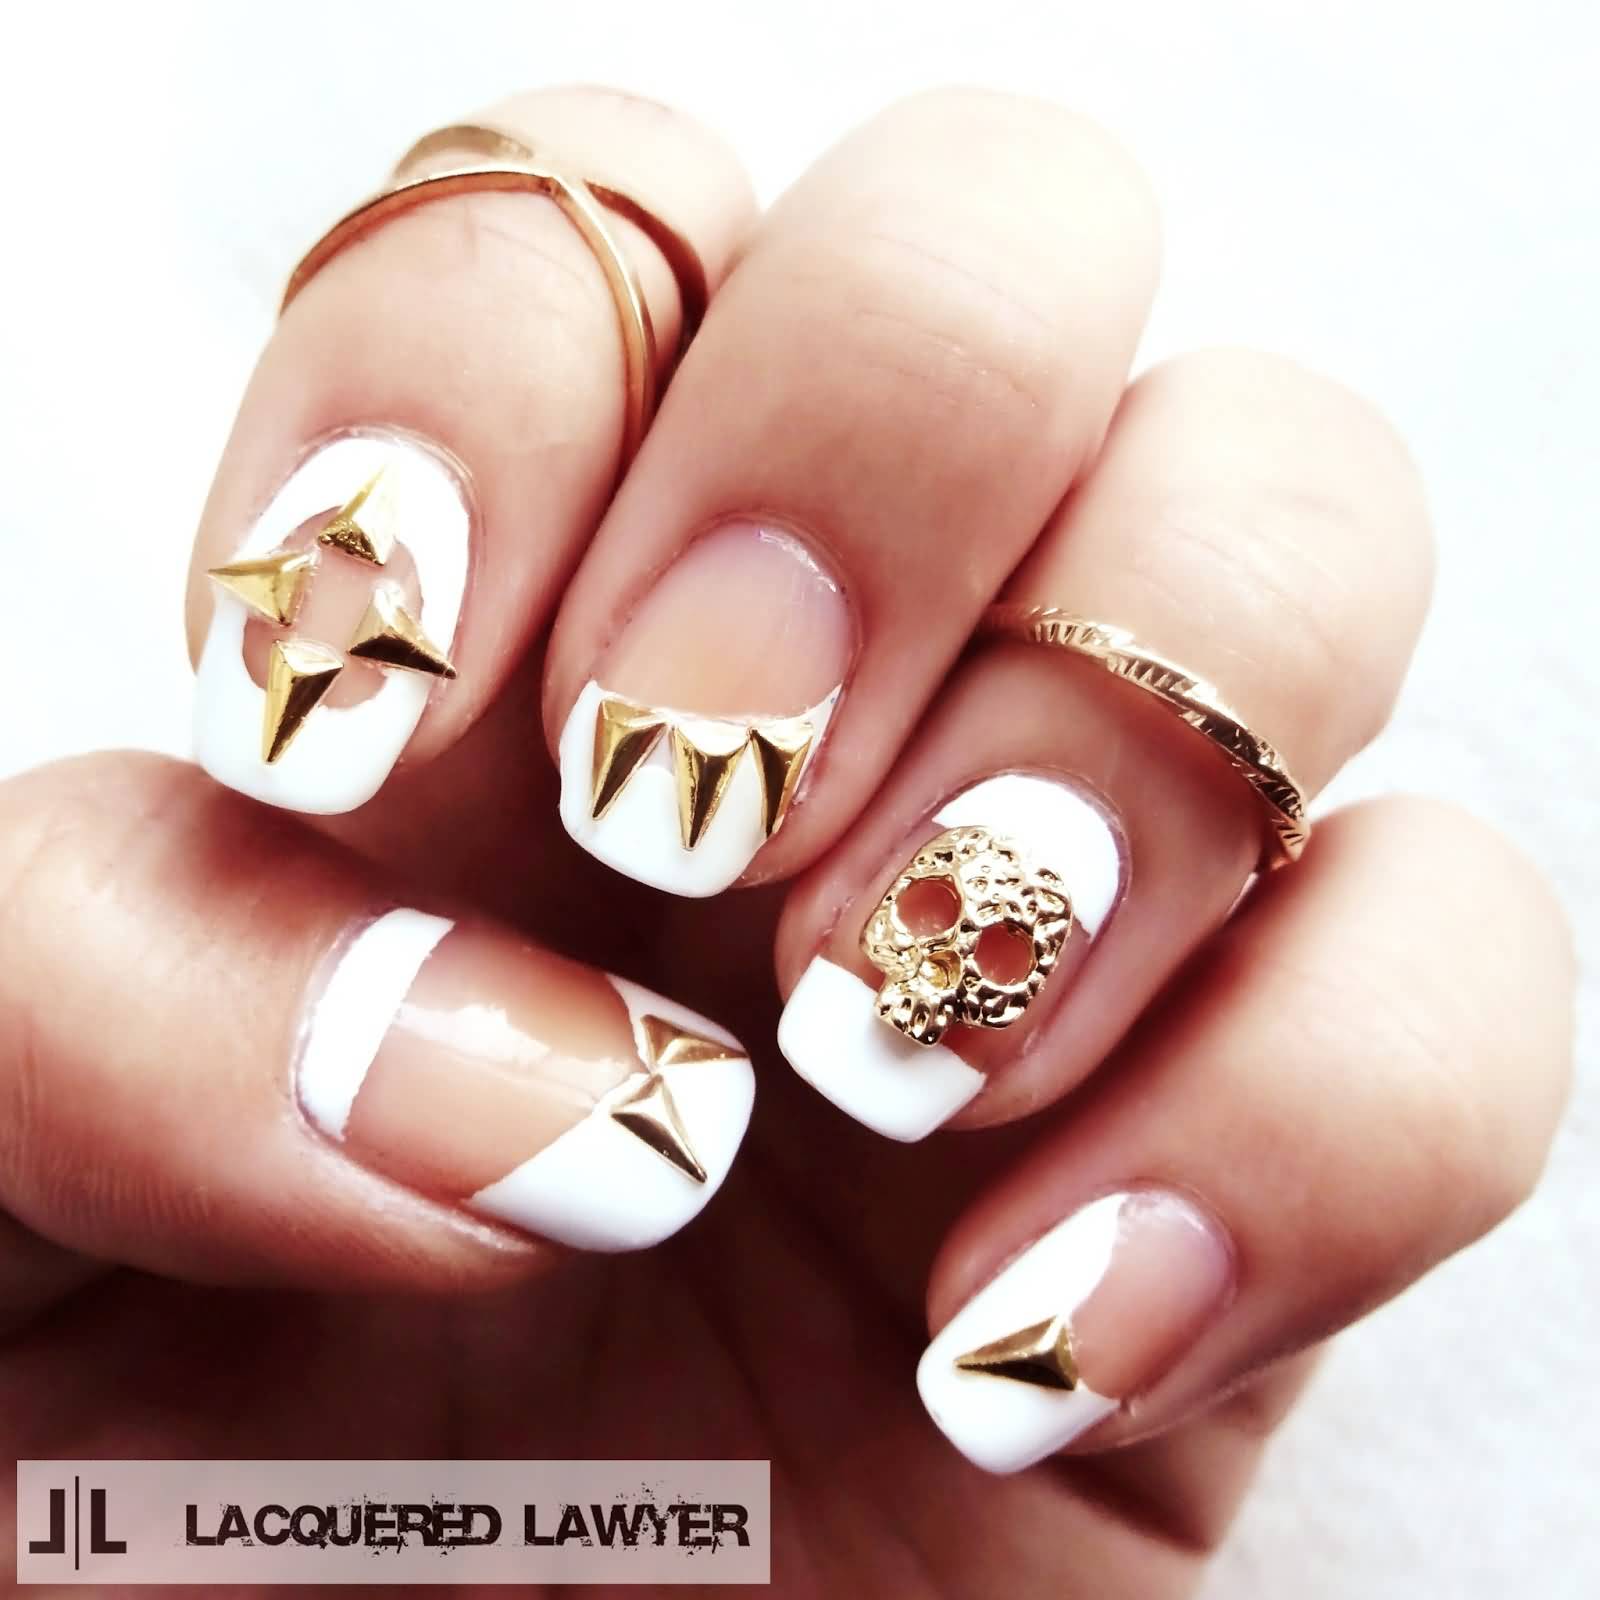 White Negative Space Nail Art With Skulls And Spikes Design Idea